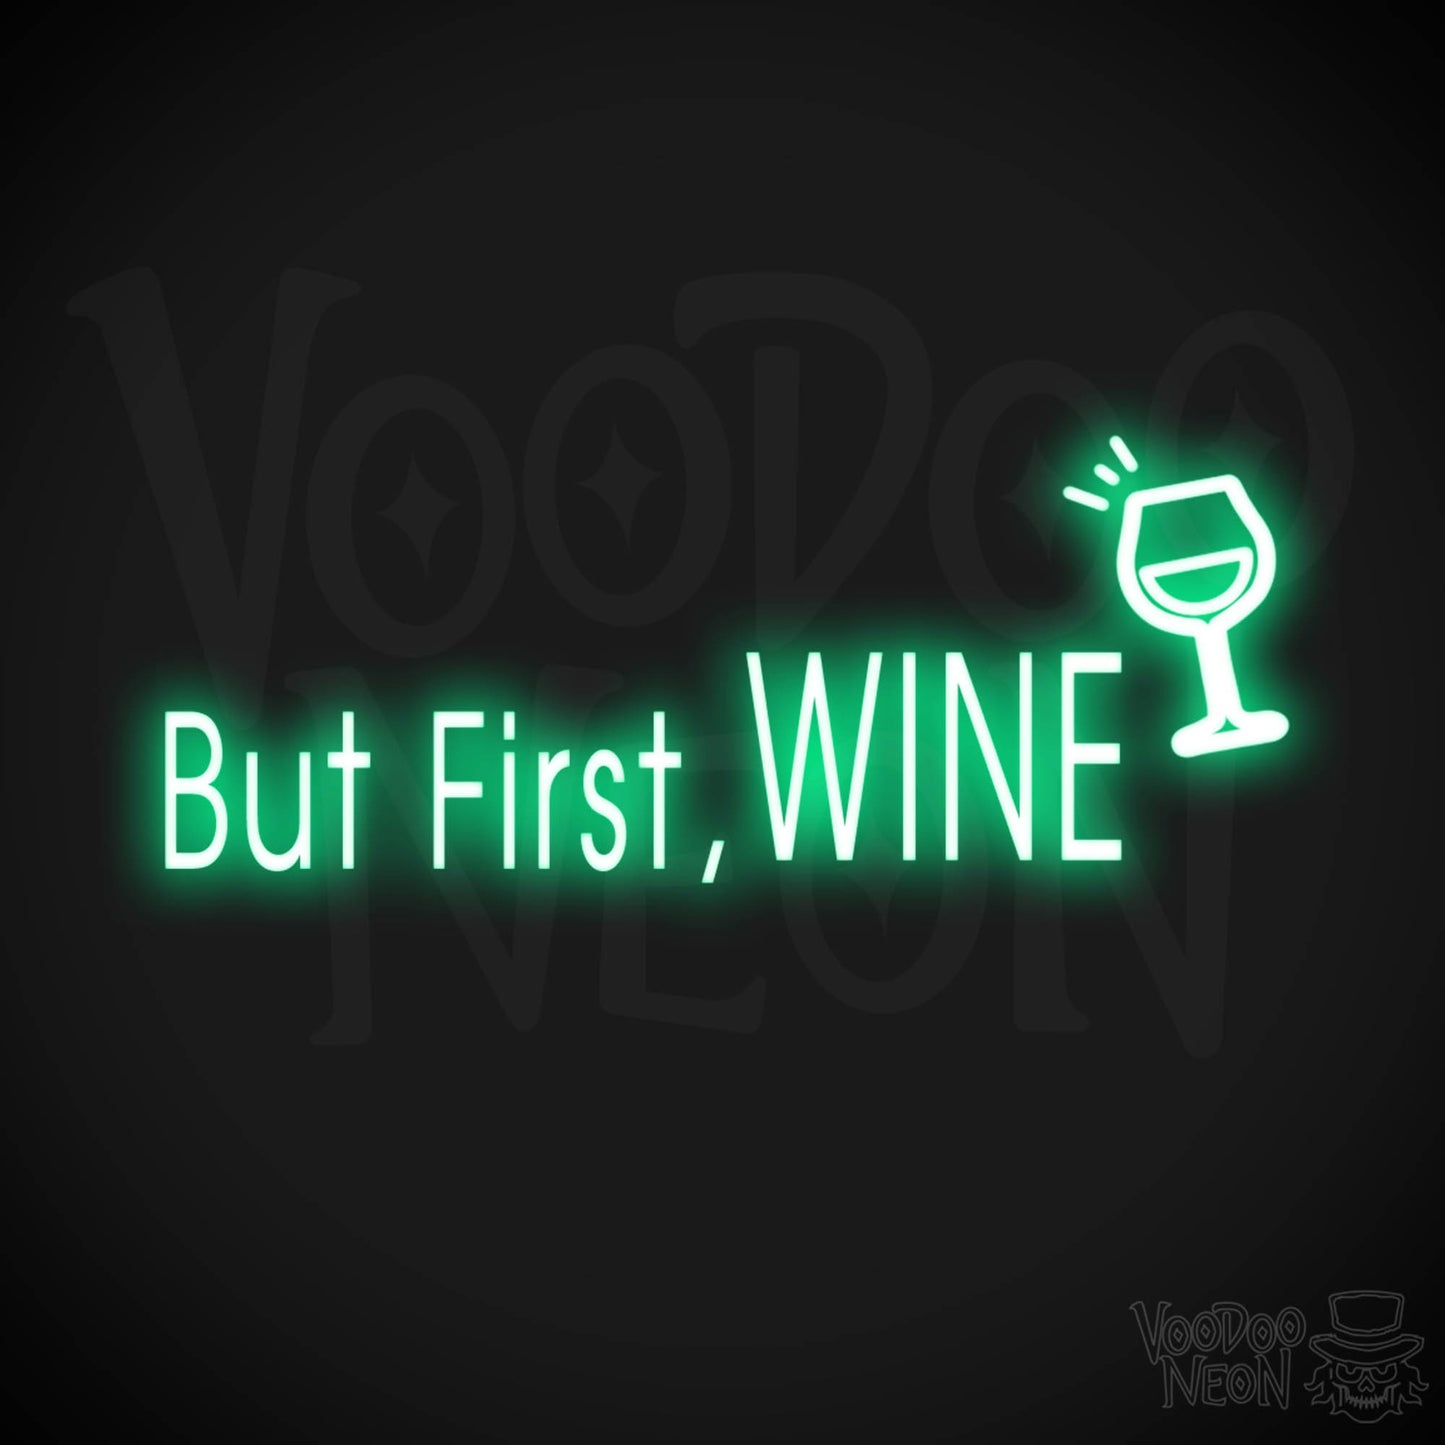 But First Wine Neon Sign - But First Wine Sign - Neon Wine Wall Art - Color Green